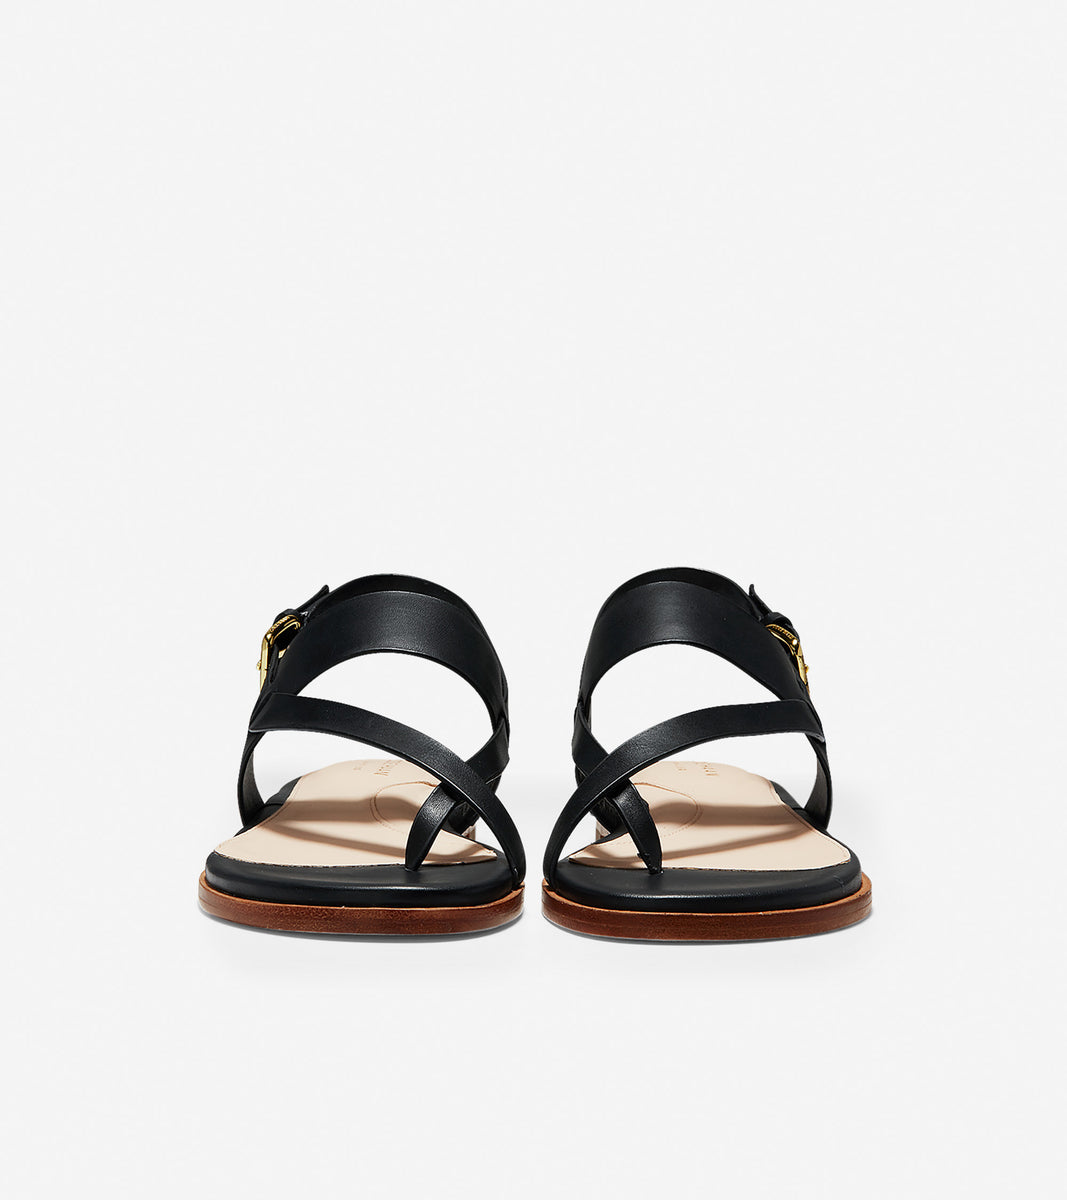 ColeHaan-Anica Thong Sandal-w07409-Black Leather